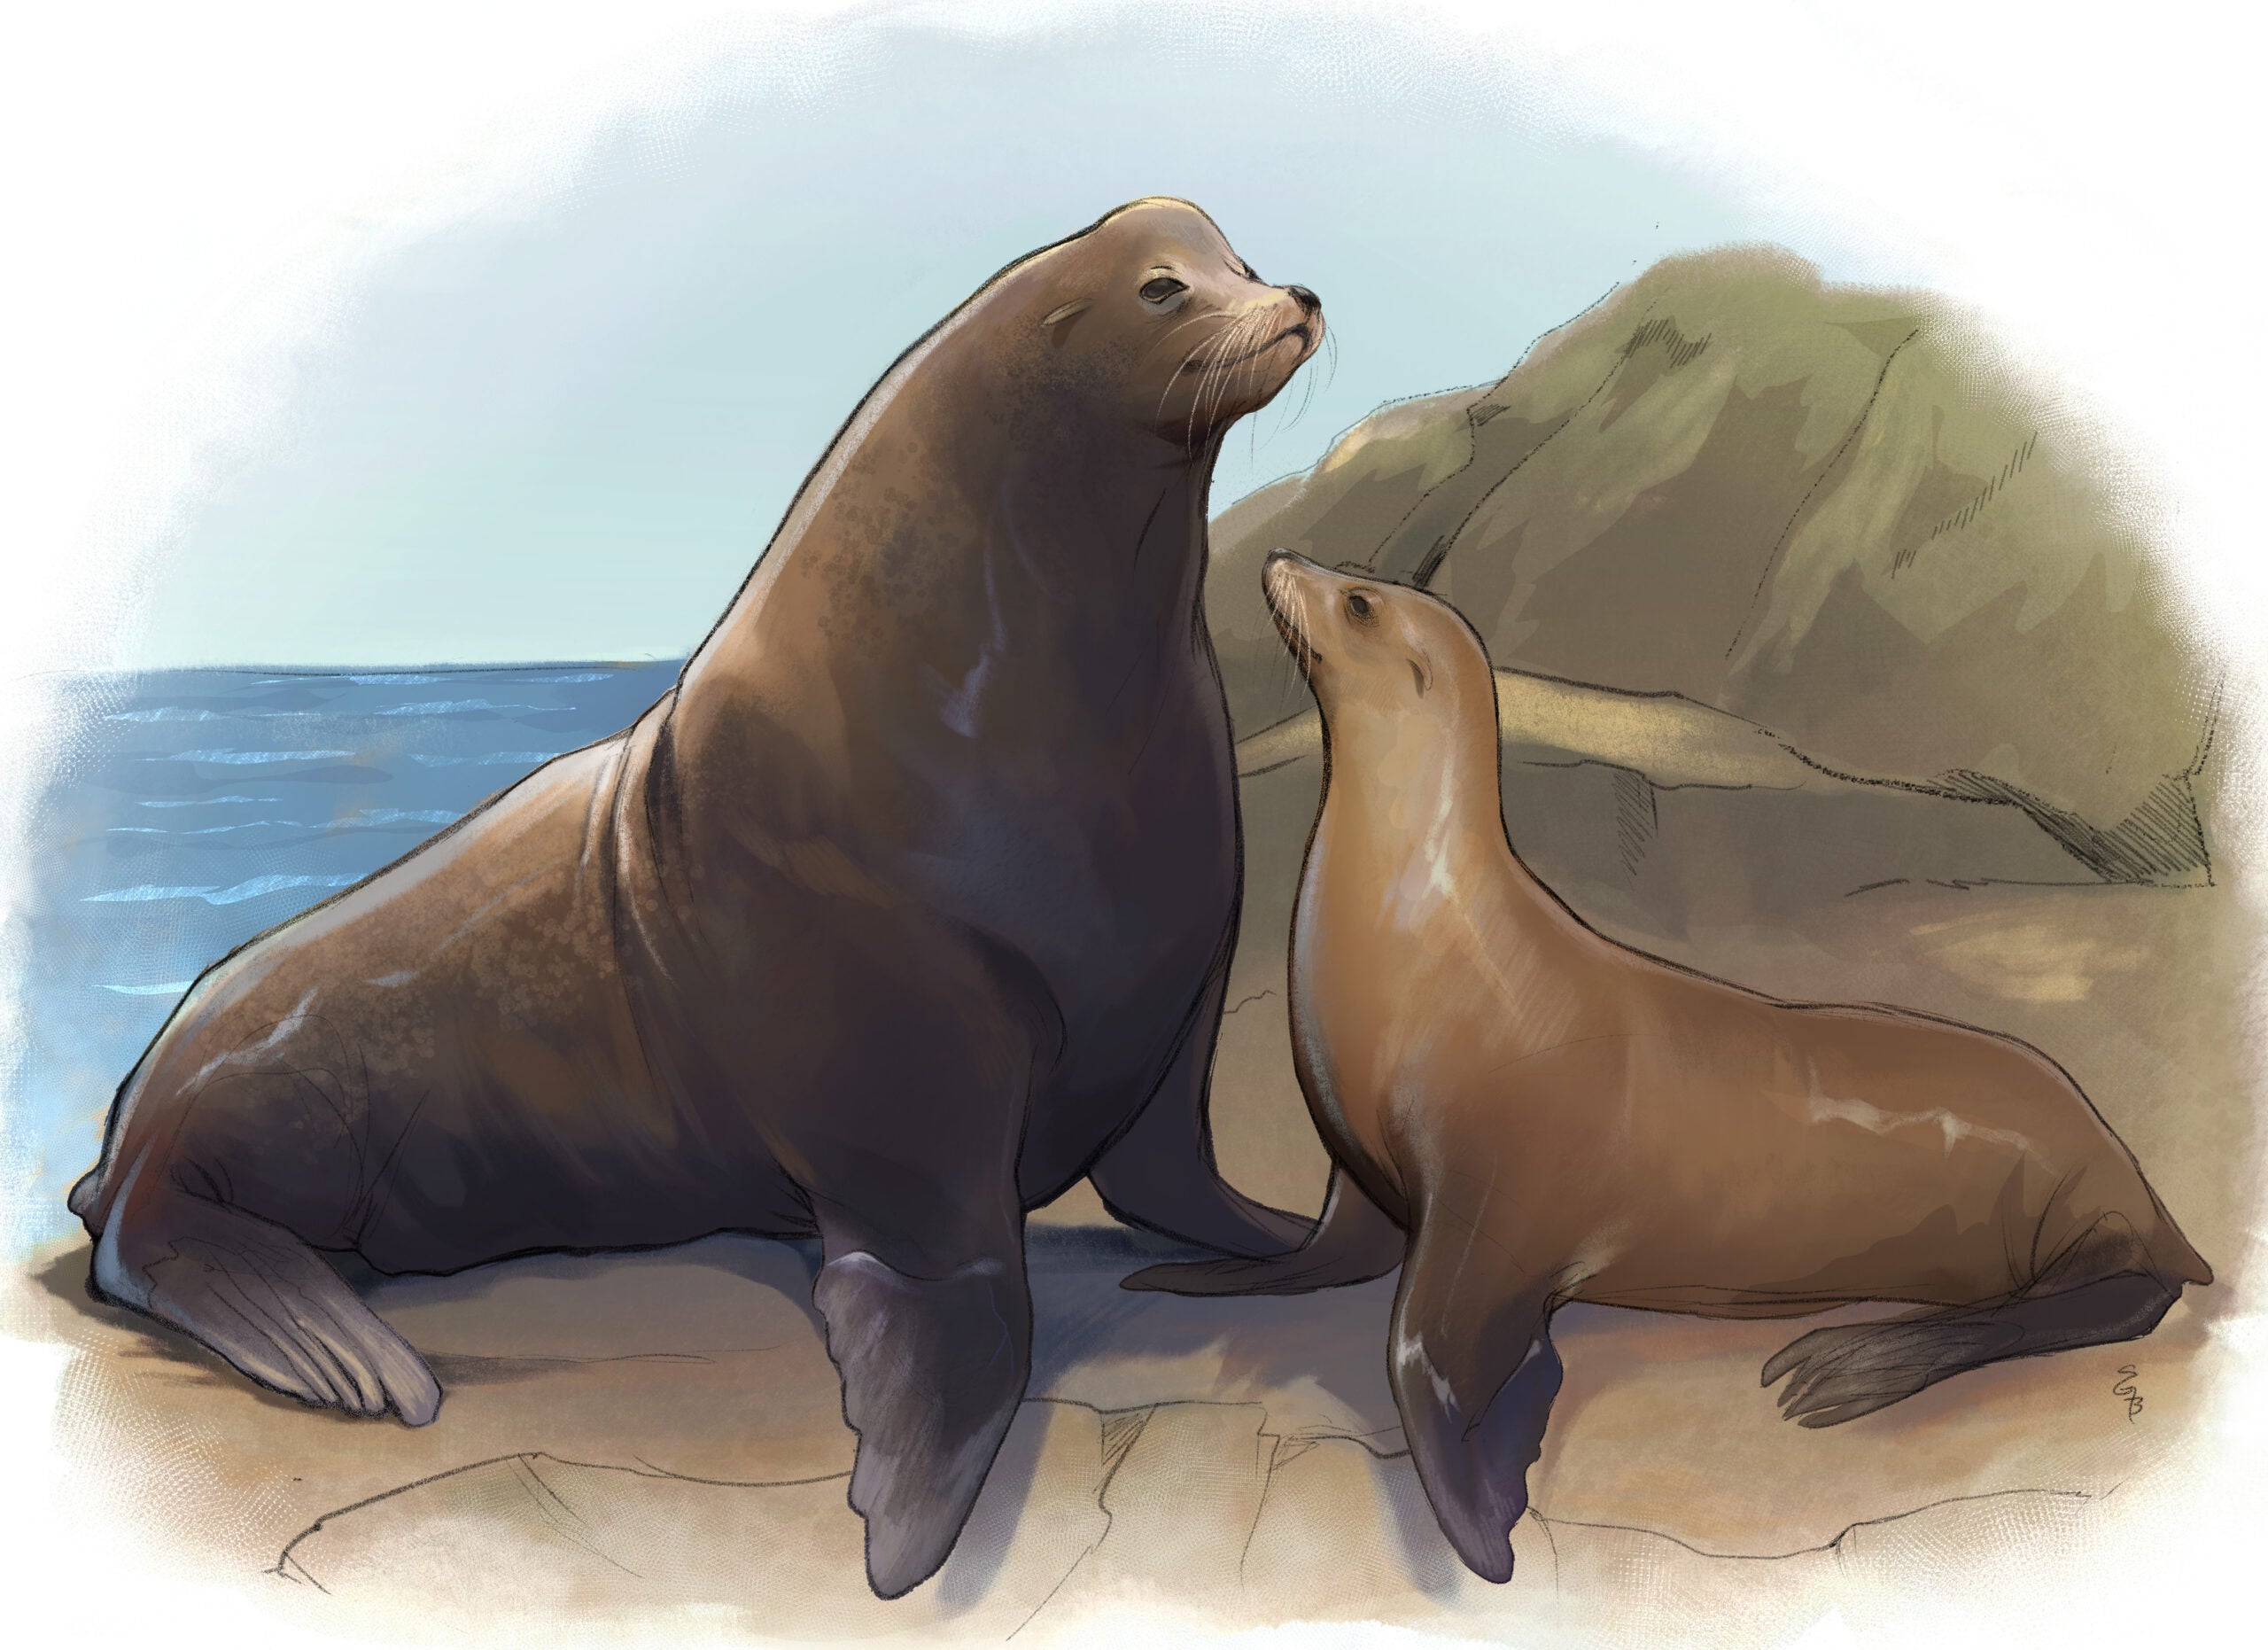 A larger male California sea lion next to a smaller female.